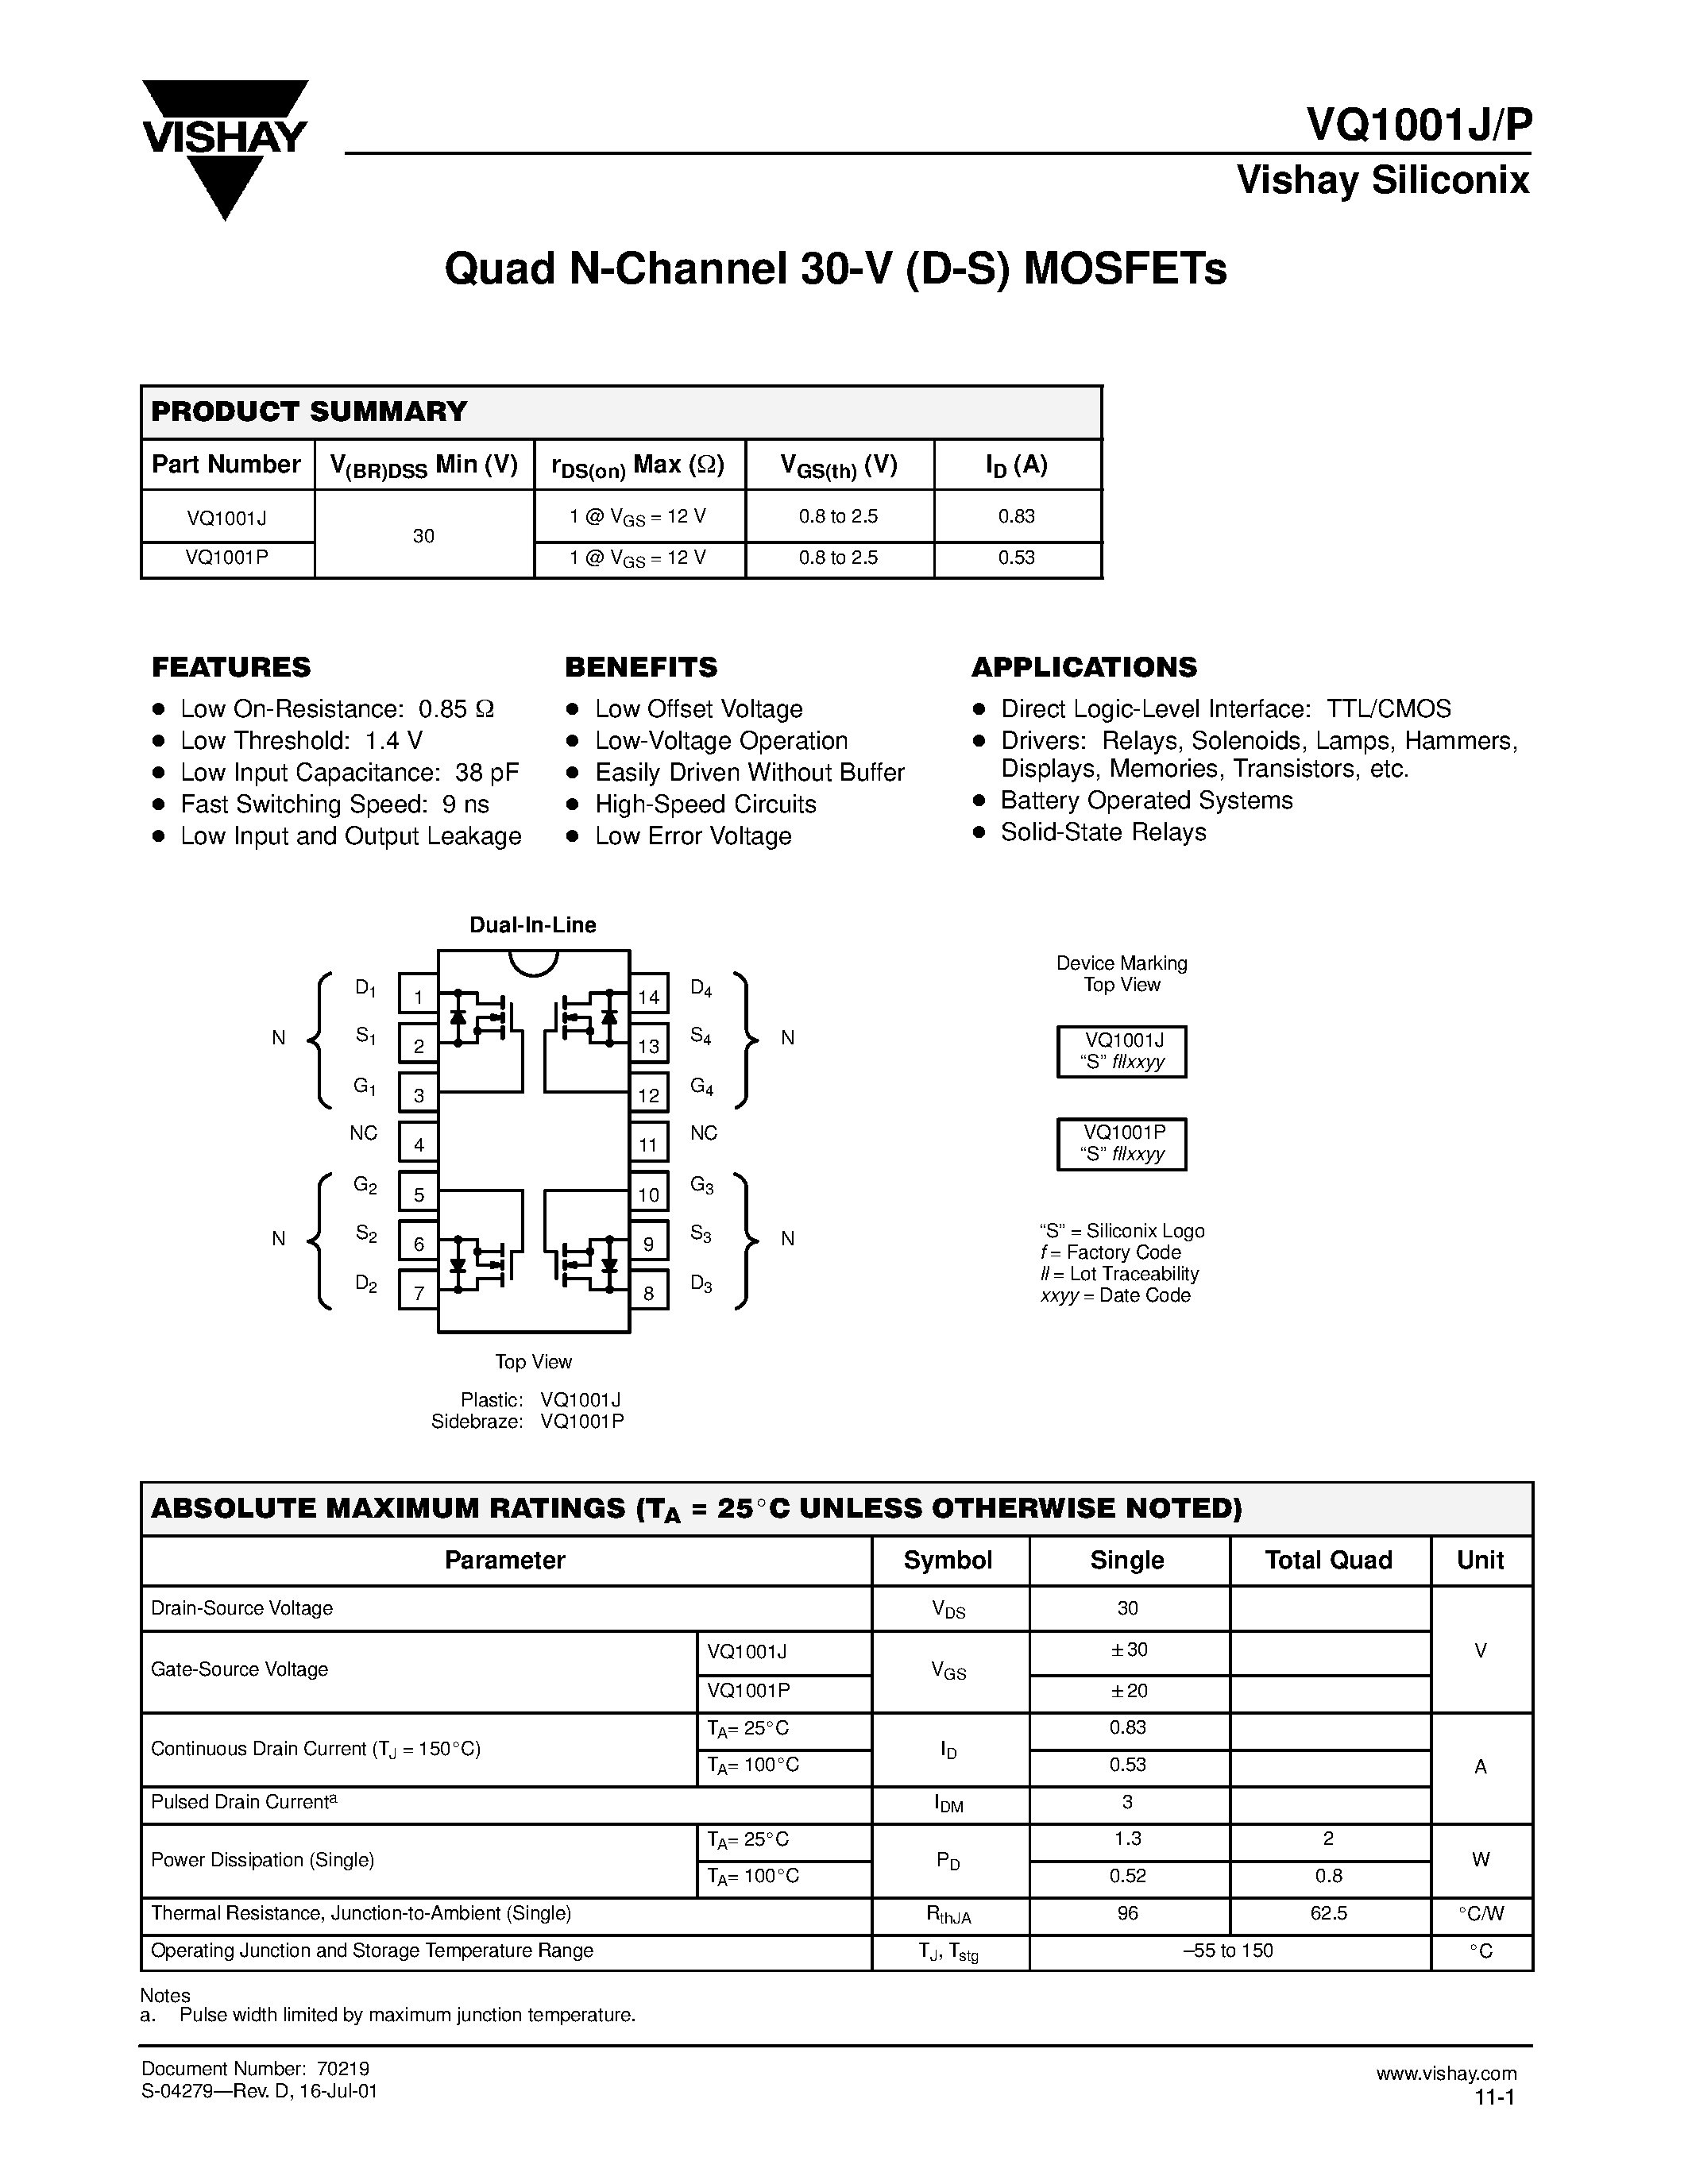 Datasheet VQ1001P - Quad N-Channel 30-V (D-S) MOSFETs page 1